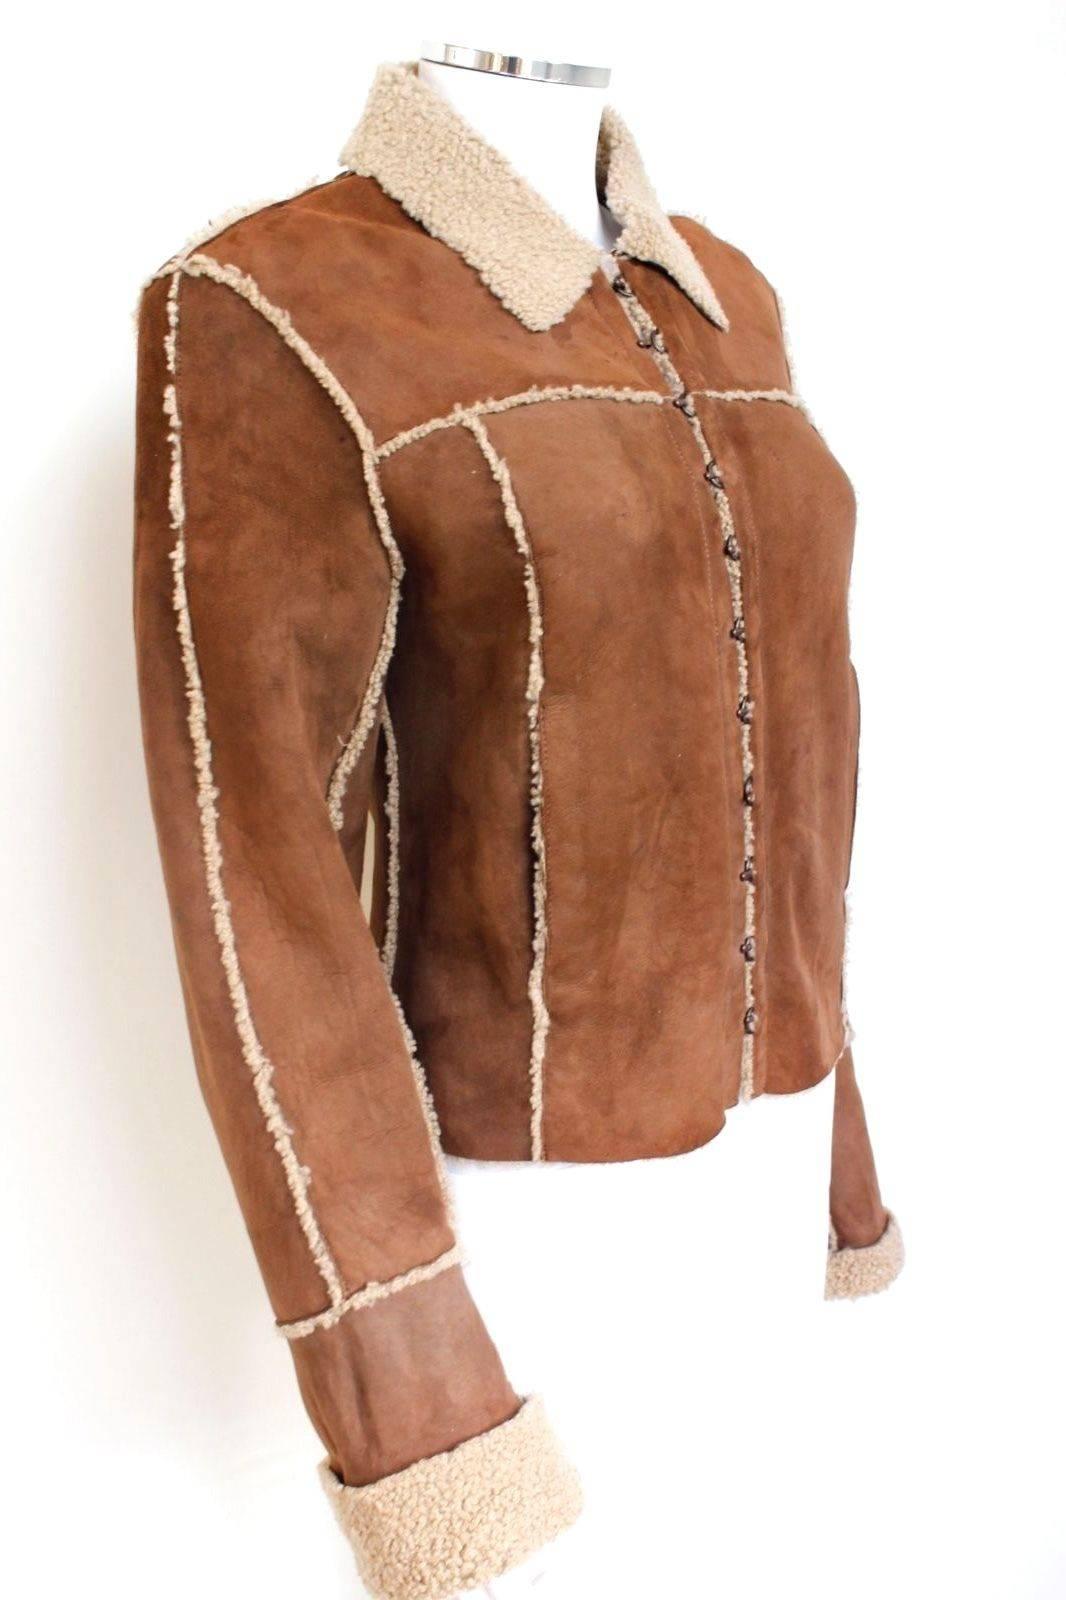 Balmain Brown Shearling Sheepskin Leather Jacket 38 uk 8
Amazing Balmain chestnut brown jacket with shearling contrasting seams and lining.
Front pockets with hook closure 
Length 21 inches, chest 18 inches across, waist 17 inches across laid